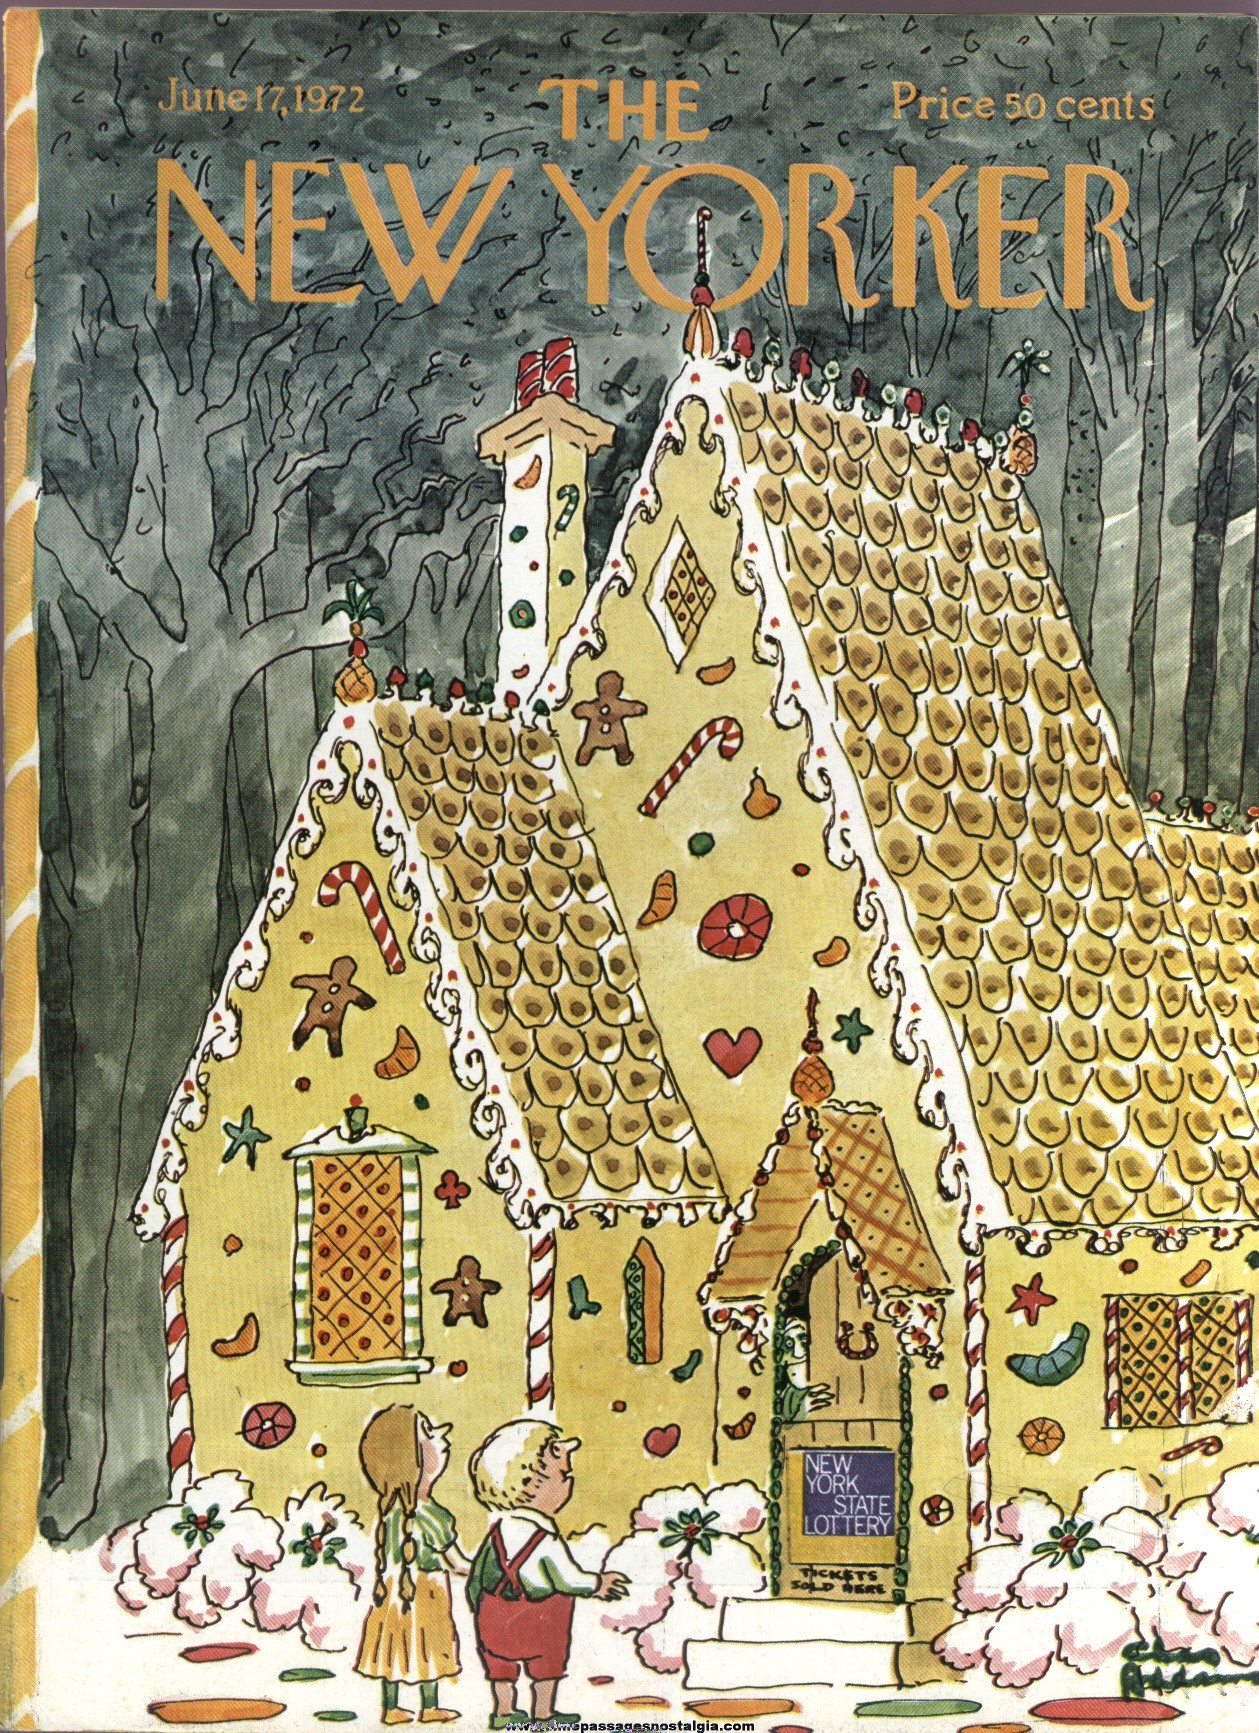 New Yorker Magazine - June 17, 1972 - Cover by Charles (Chas) Addams